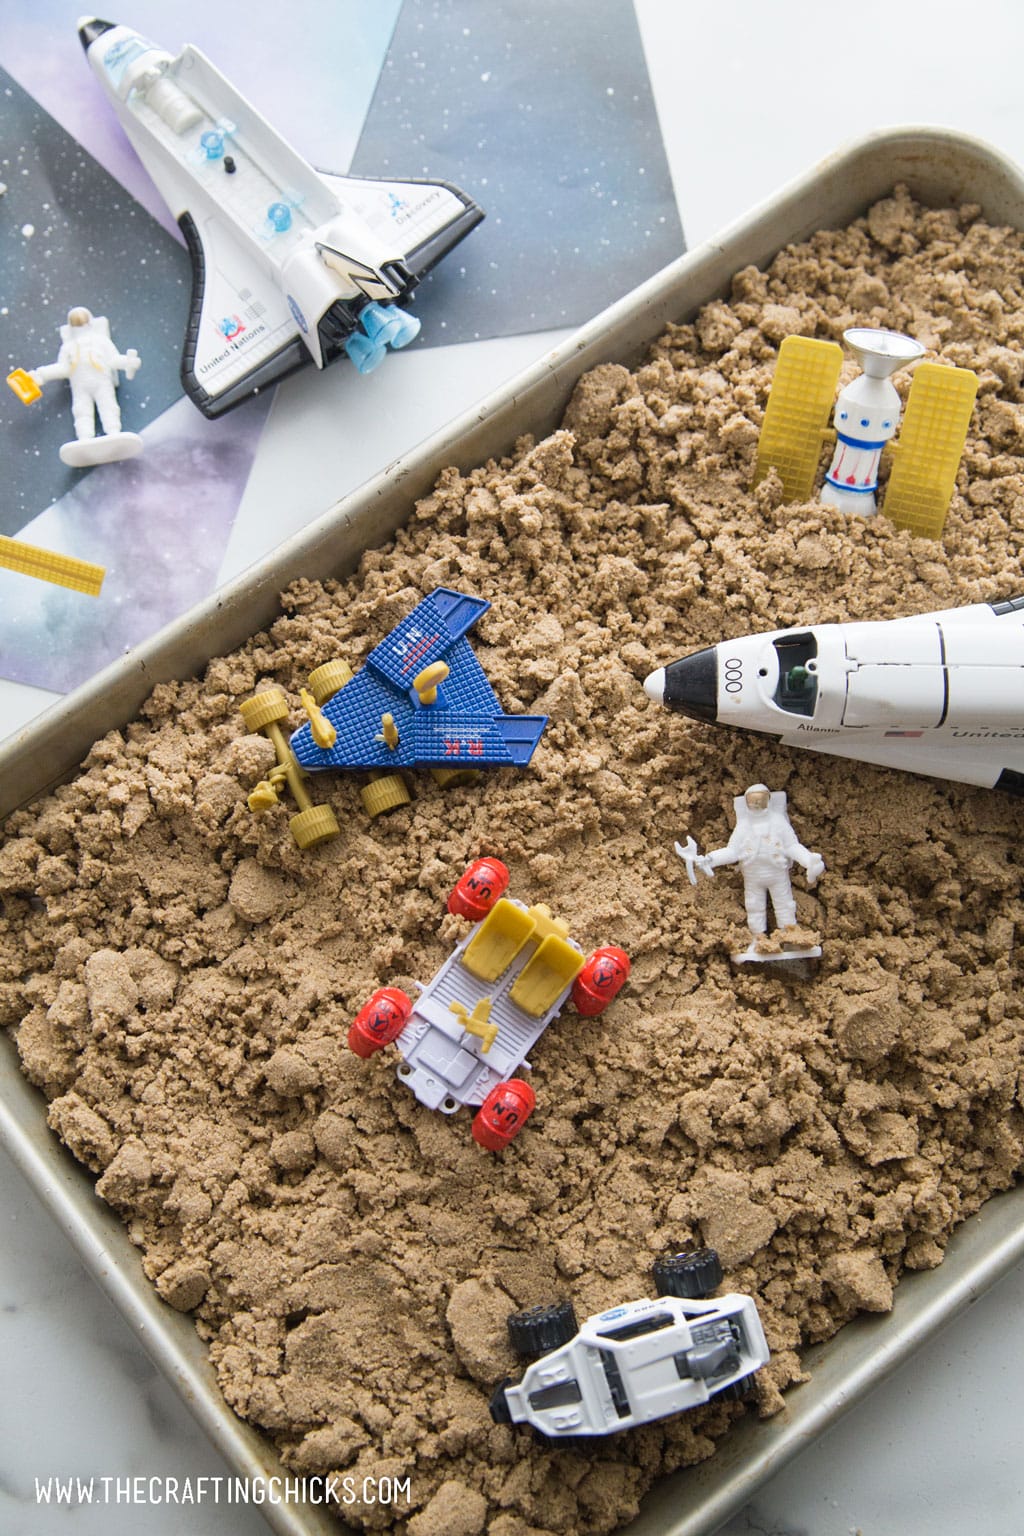 Moon sand with rocket and astronaut as play toys.